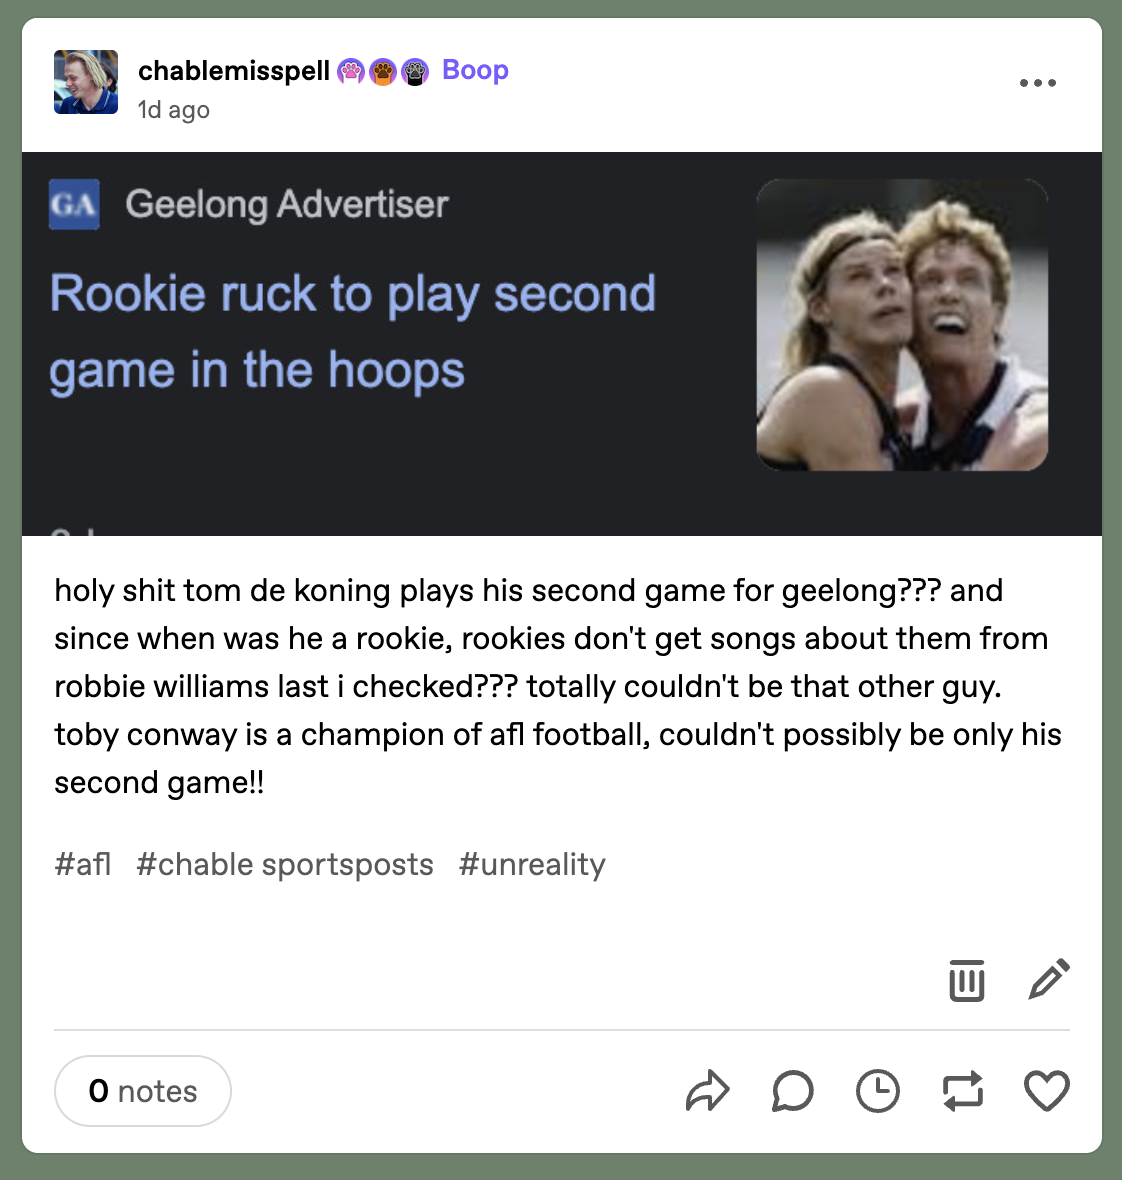 A post by Tumblr user @chablemisspell. At the start is a photo of a news article. In the image is a blurred photo of Tom De Koning and Toby Conway appearing in a ruck contest. The photo zooms in on their faces. The text of the article by the Geelong Advertiser reads, “Rookie ruck to play second game in the hoops”. Under the image, @chablemisspell writes, “holy shit tom de koning plays his second game for geelong??? and since when was he a rookie, rookies don't get songs about them from robbie williams last i checked??? totally couldn't be that other guy. toby conway is a champion of afl football, couldn't possibly be only his second game!! the tags are “afl”, “chable sportsposts” and “unreality”.